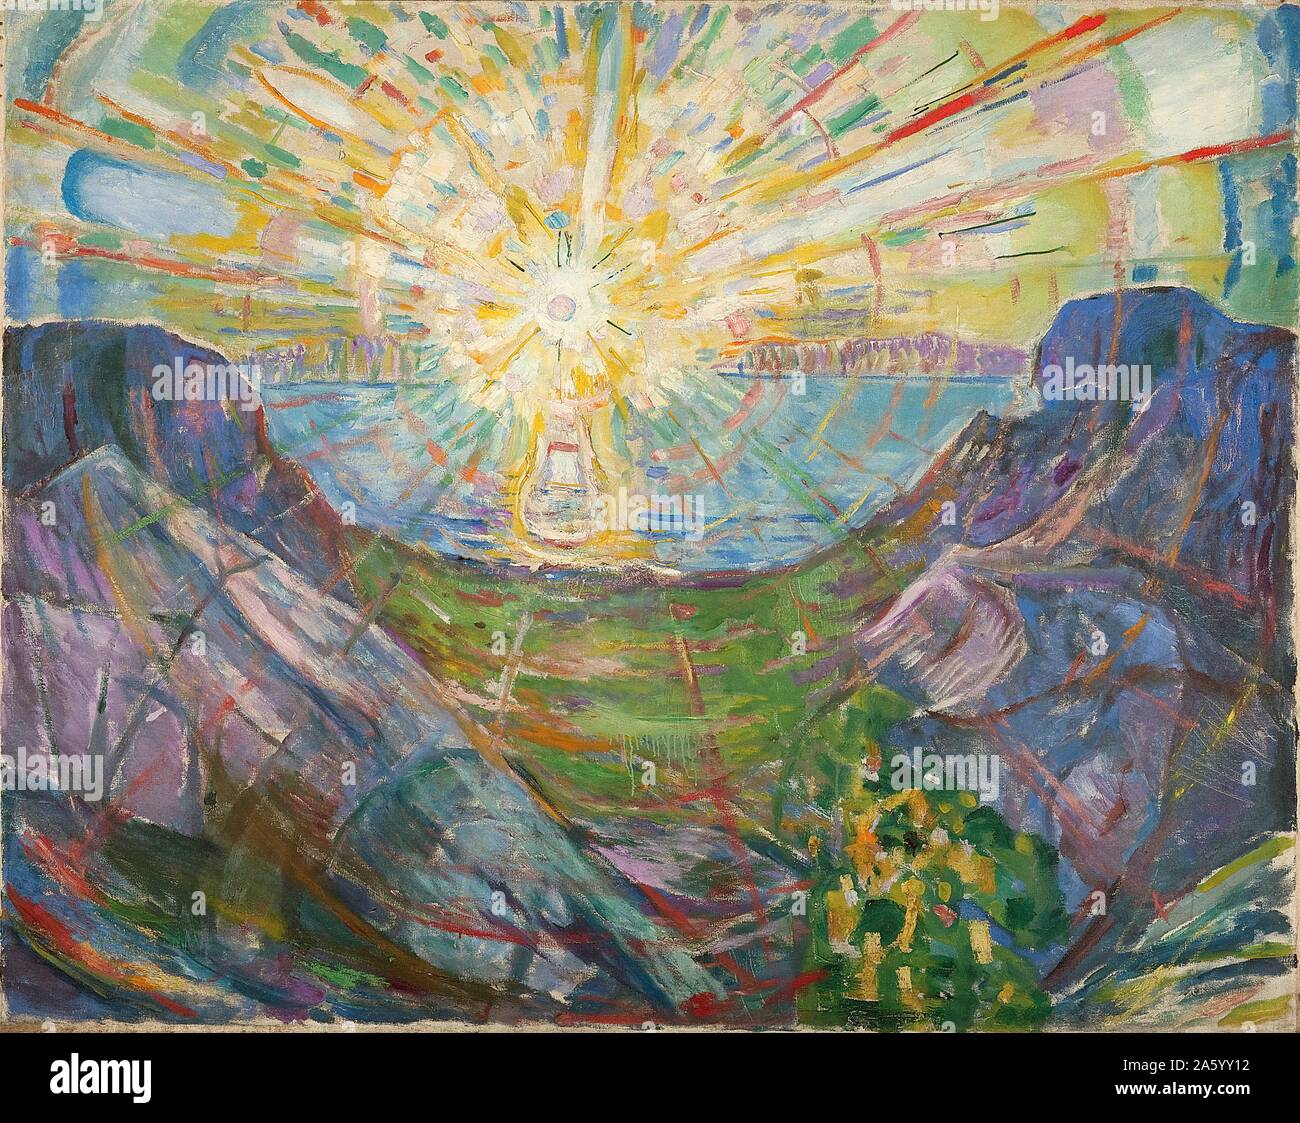 Painting titled 'The Sun' by Edvard Munch (1863-1944) Norwegian painter and printmaker whose intensely evocative treatment of psychological themes built upon some of the main tenets of late 19th-century Symbolism and greatly influenced German Expressionism in the early 20th century. One of his most well-known works is The Scream of 1893. Dated 1909 Stock Photo